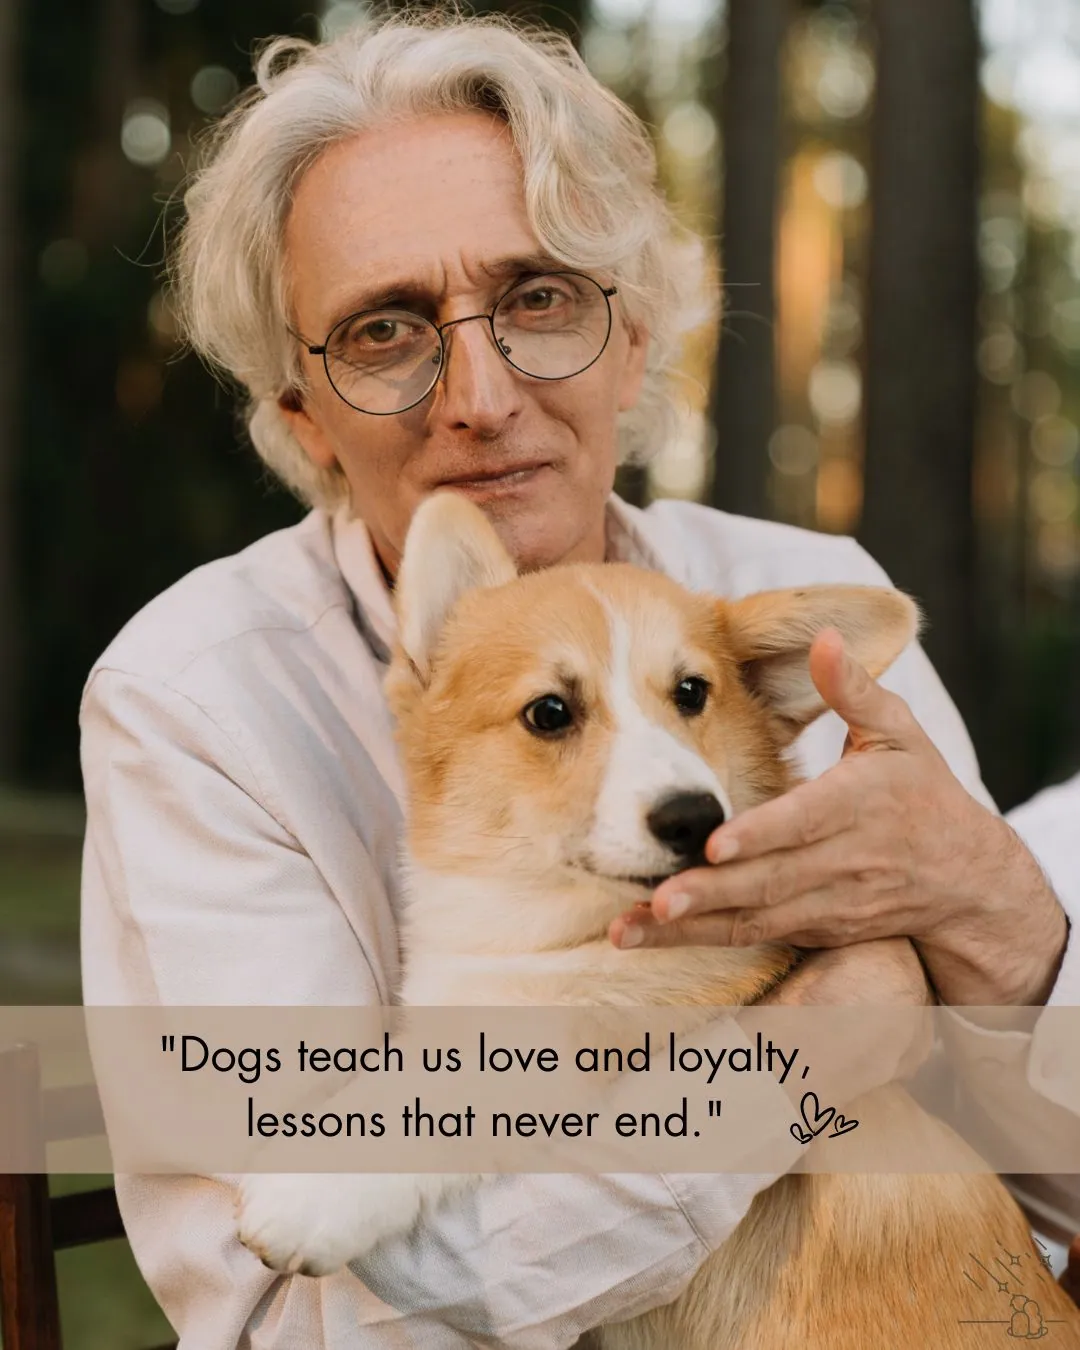 Pet Loss Quotes for Dog Image